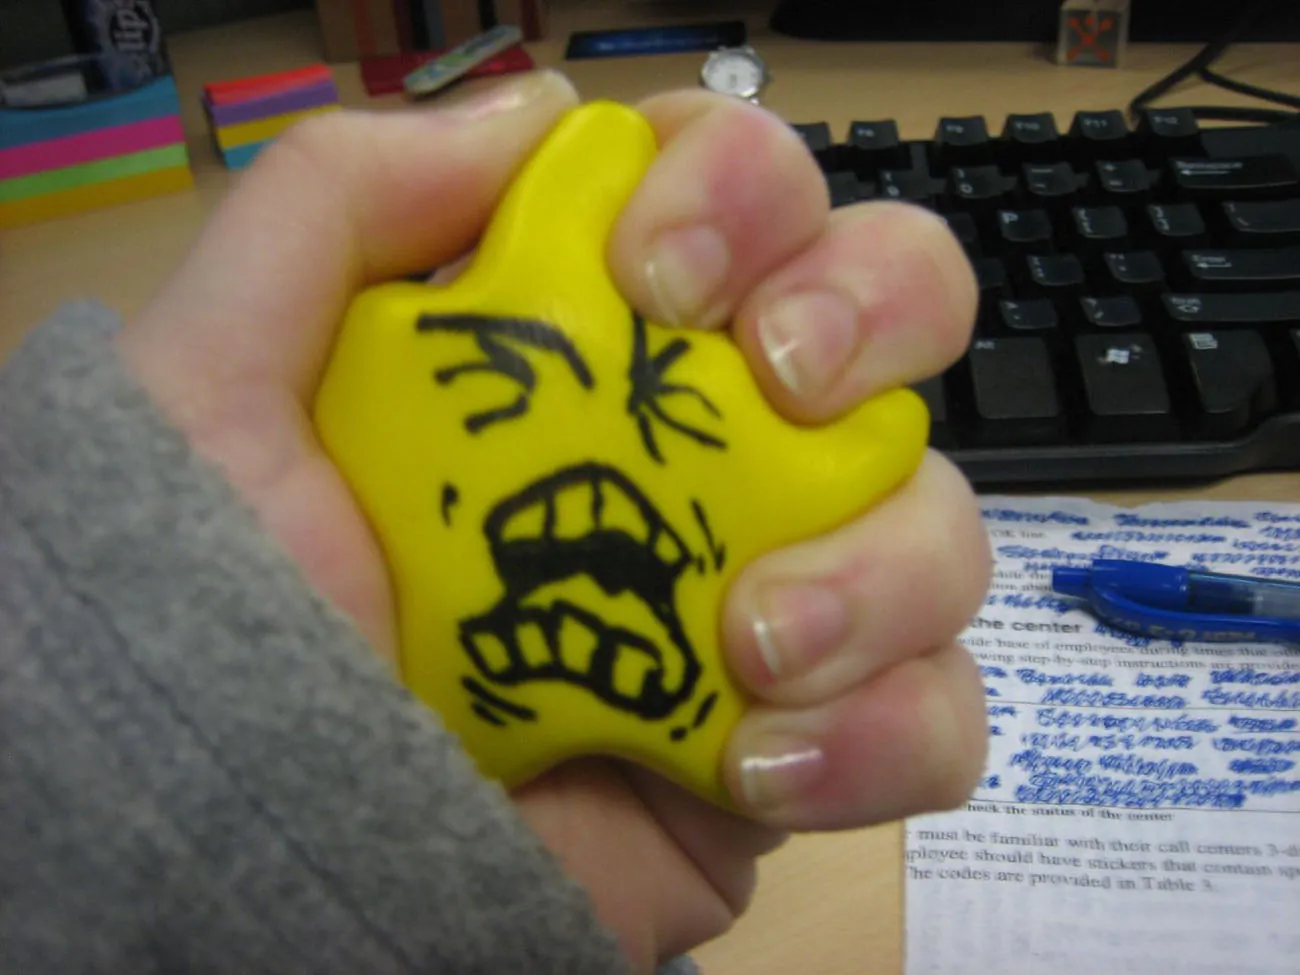 A photo shows a hand squeezing a foam star printed with an angry and yelling face.